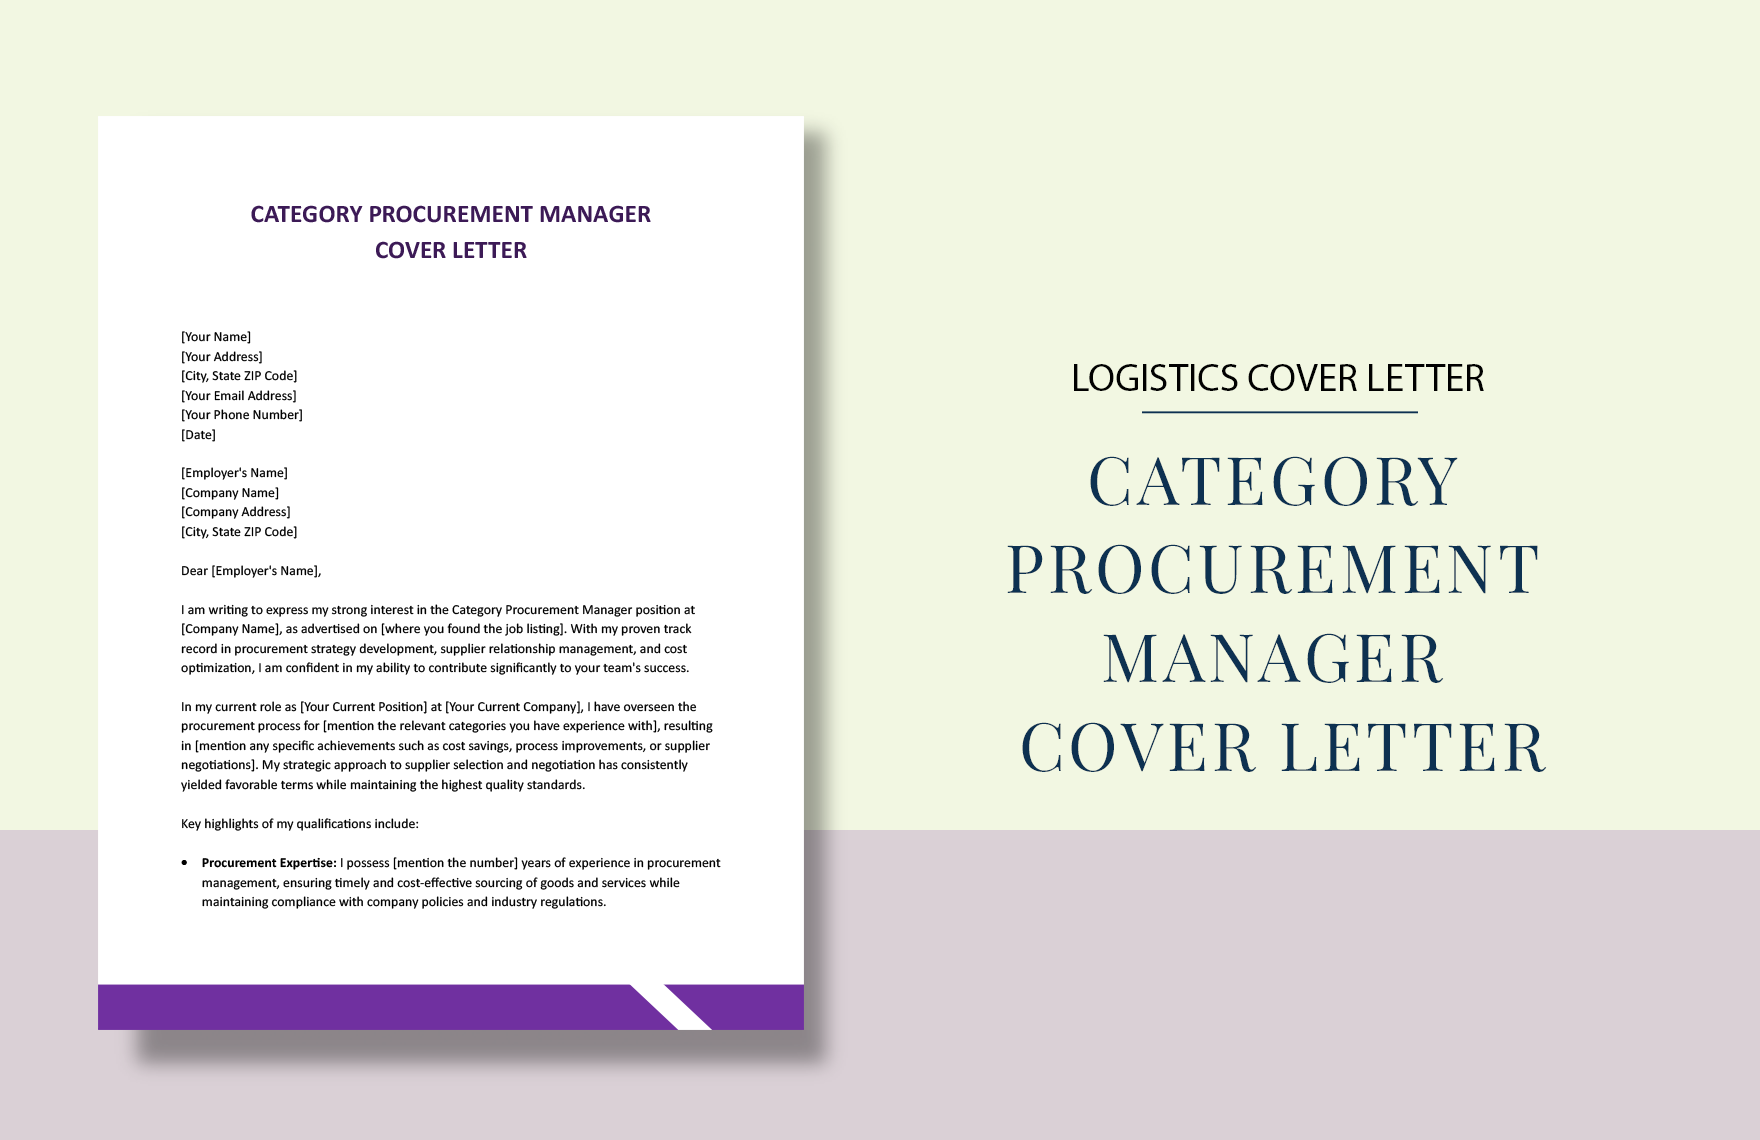 Free Category Procurement Manager Cover Letter